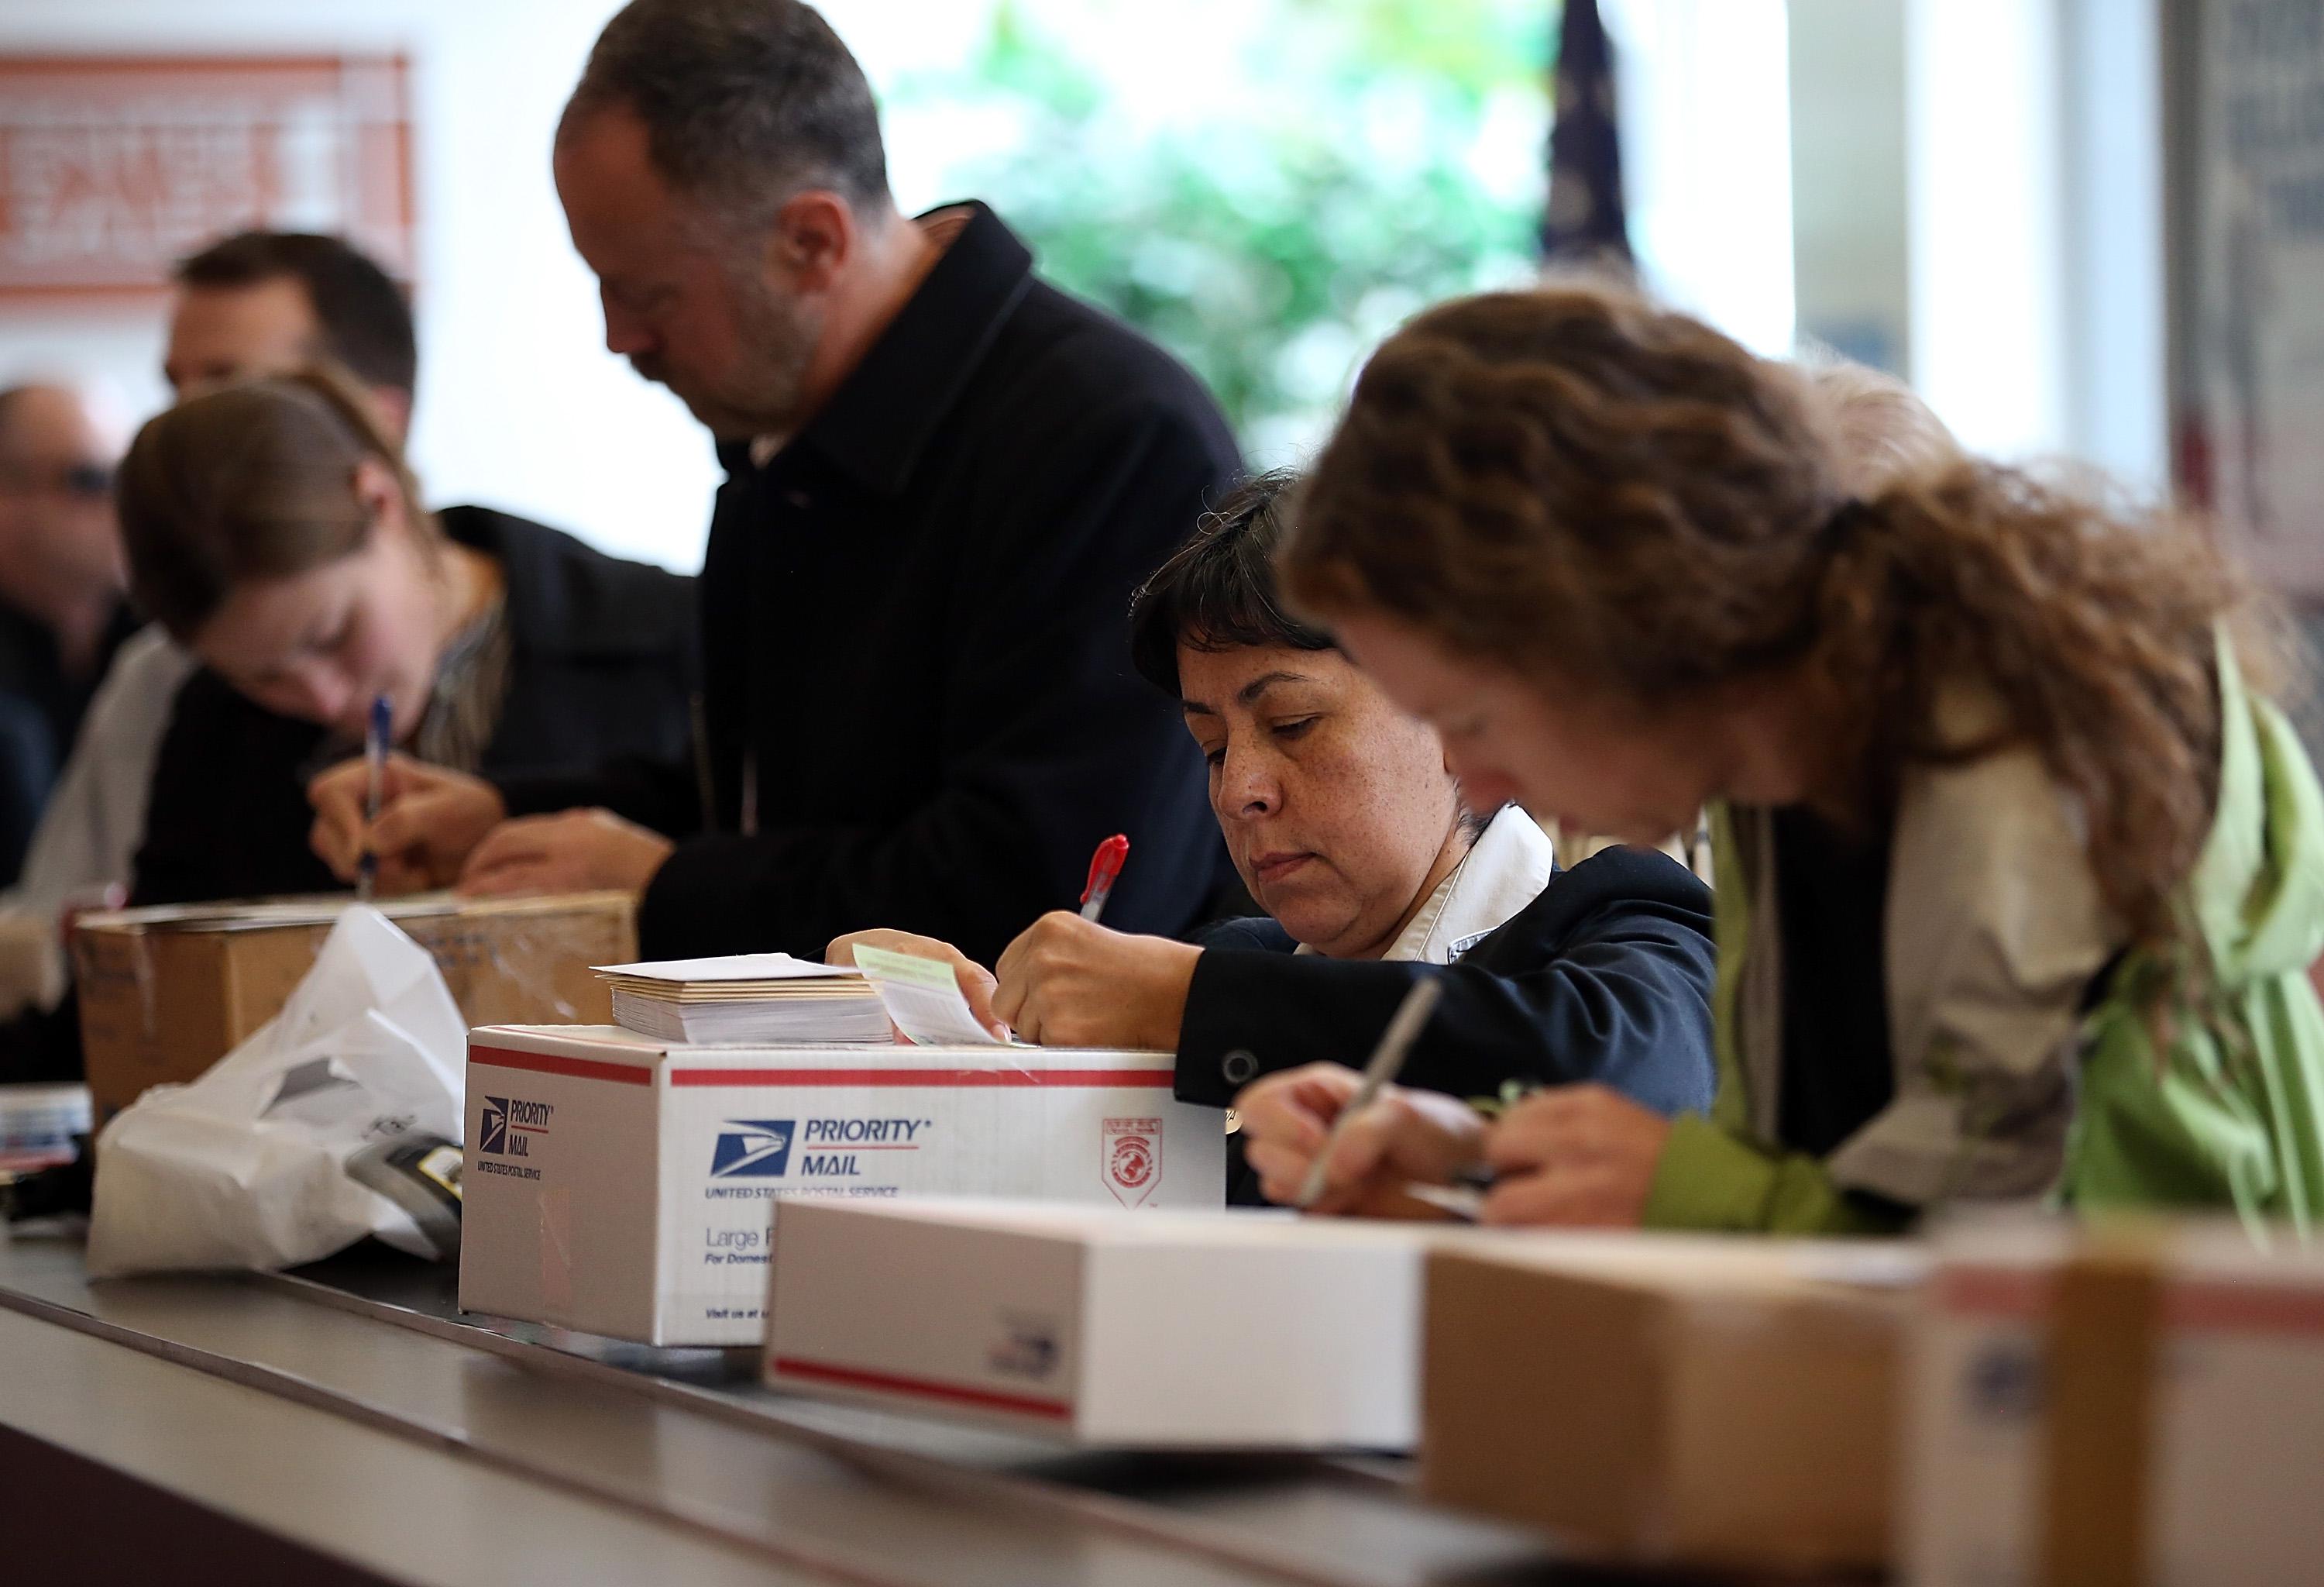 Customers fill in address information on packages at the United States Post Office at Rincon Center on Dec. 17, 2012, in San Francisco.